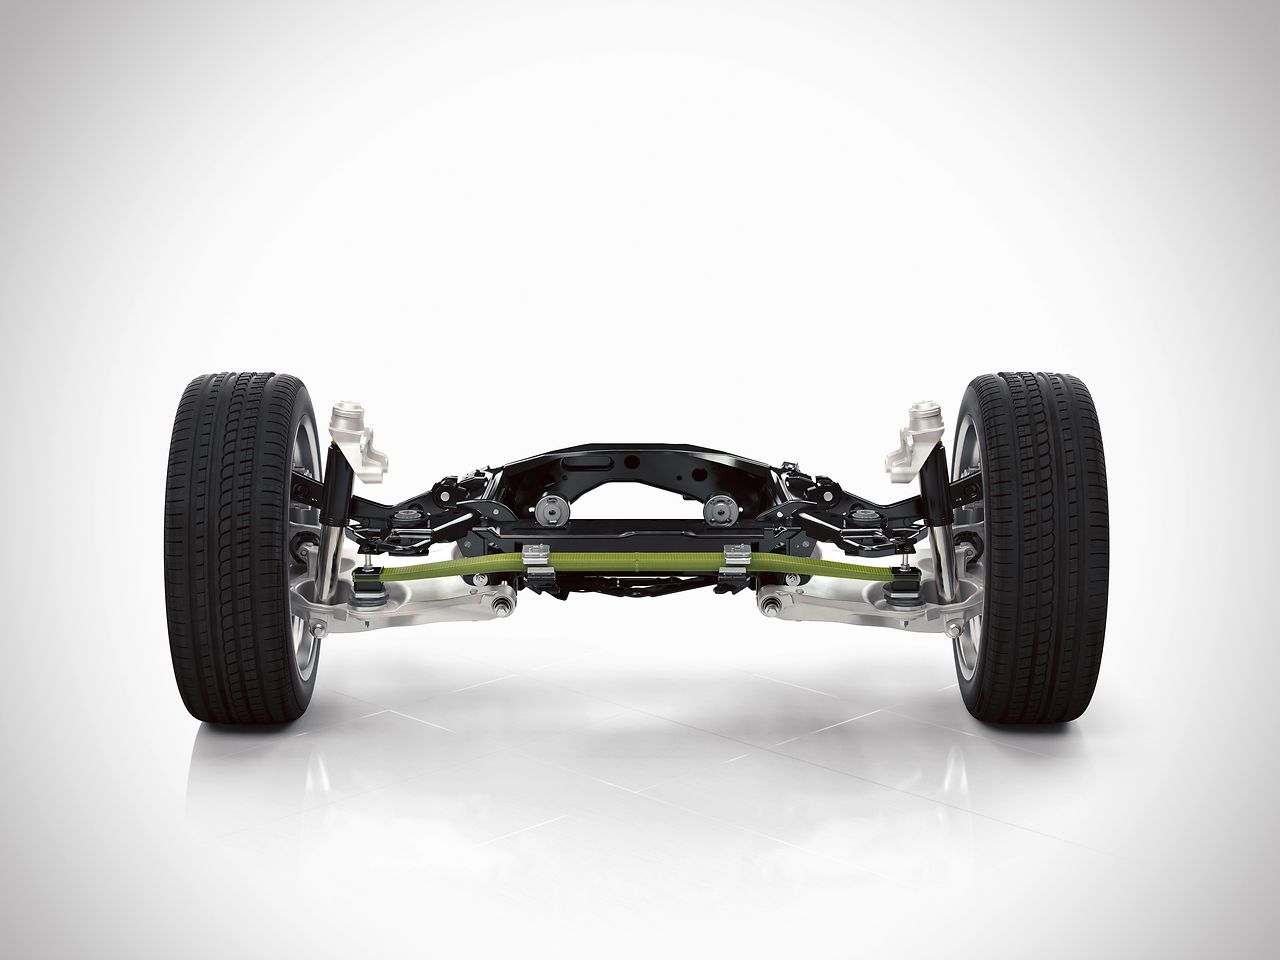 The rear axle of the new Volvo XC90 